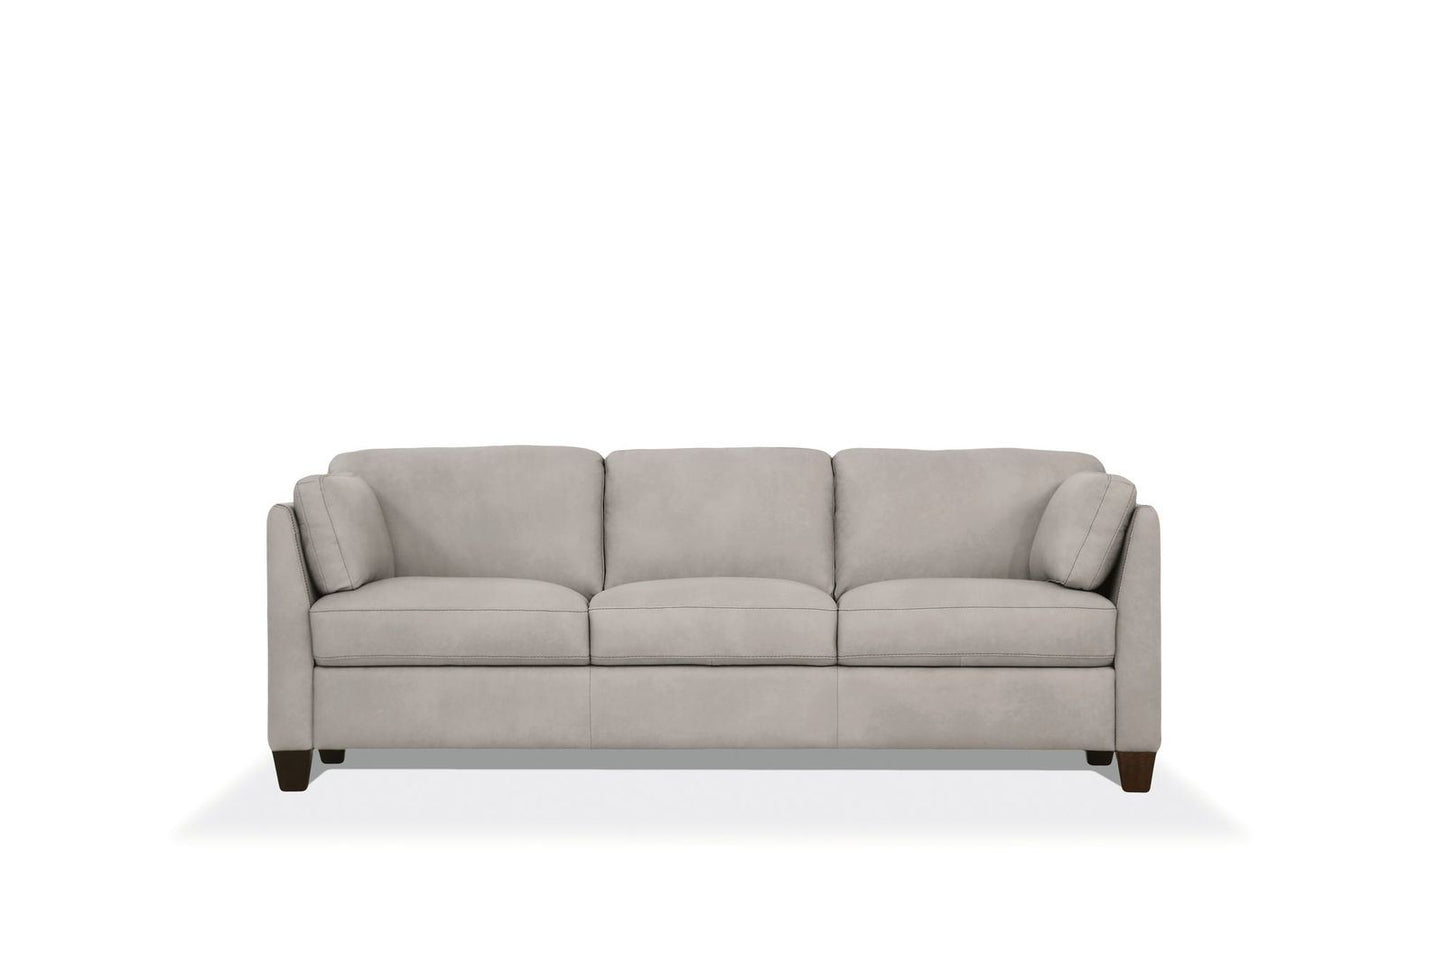 Matias Sofa, Dusty White Leather by ACME